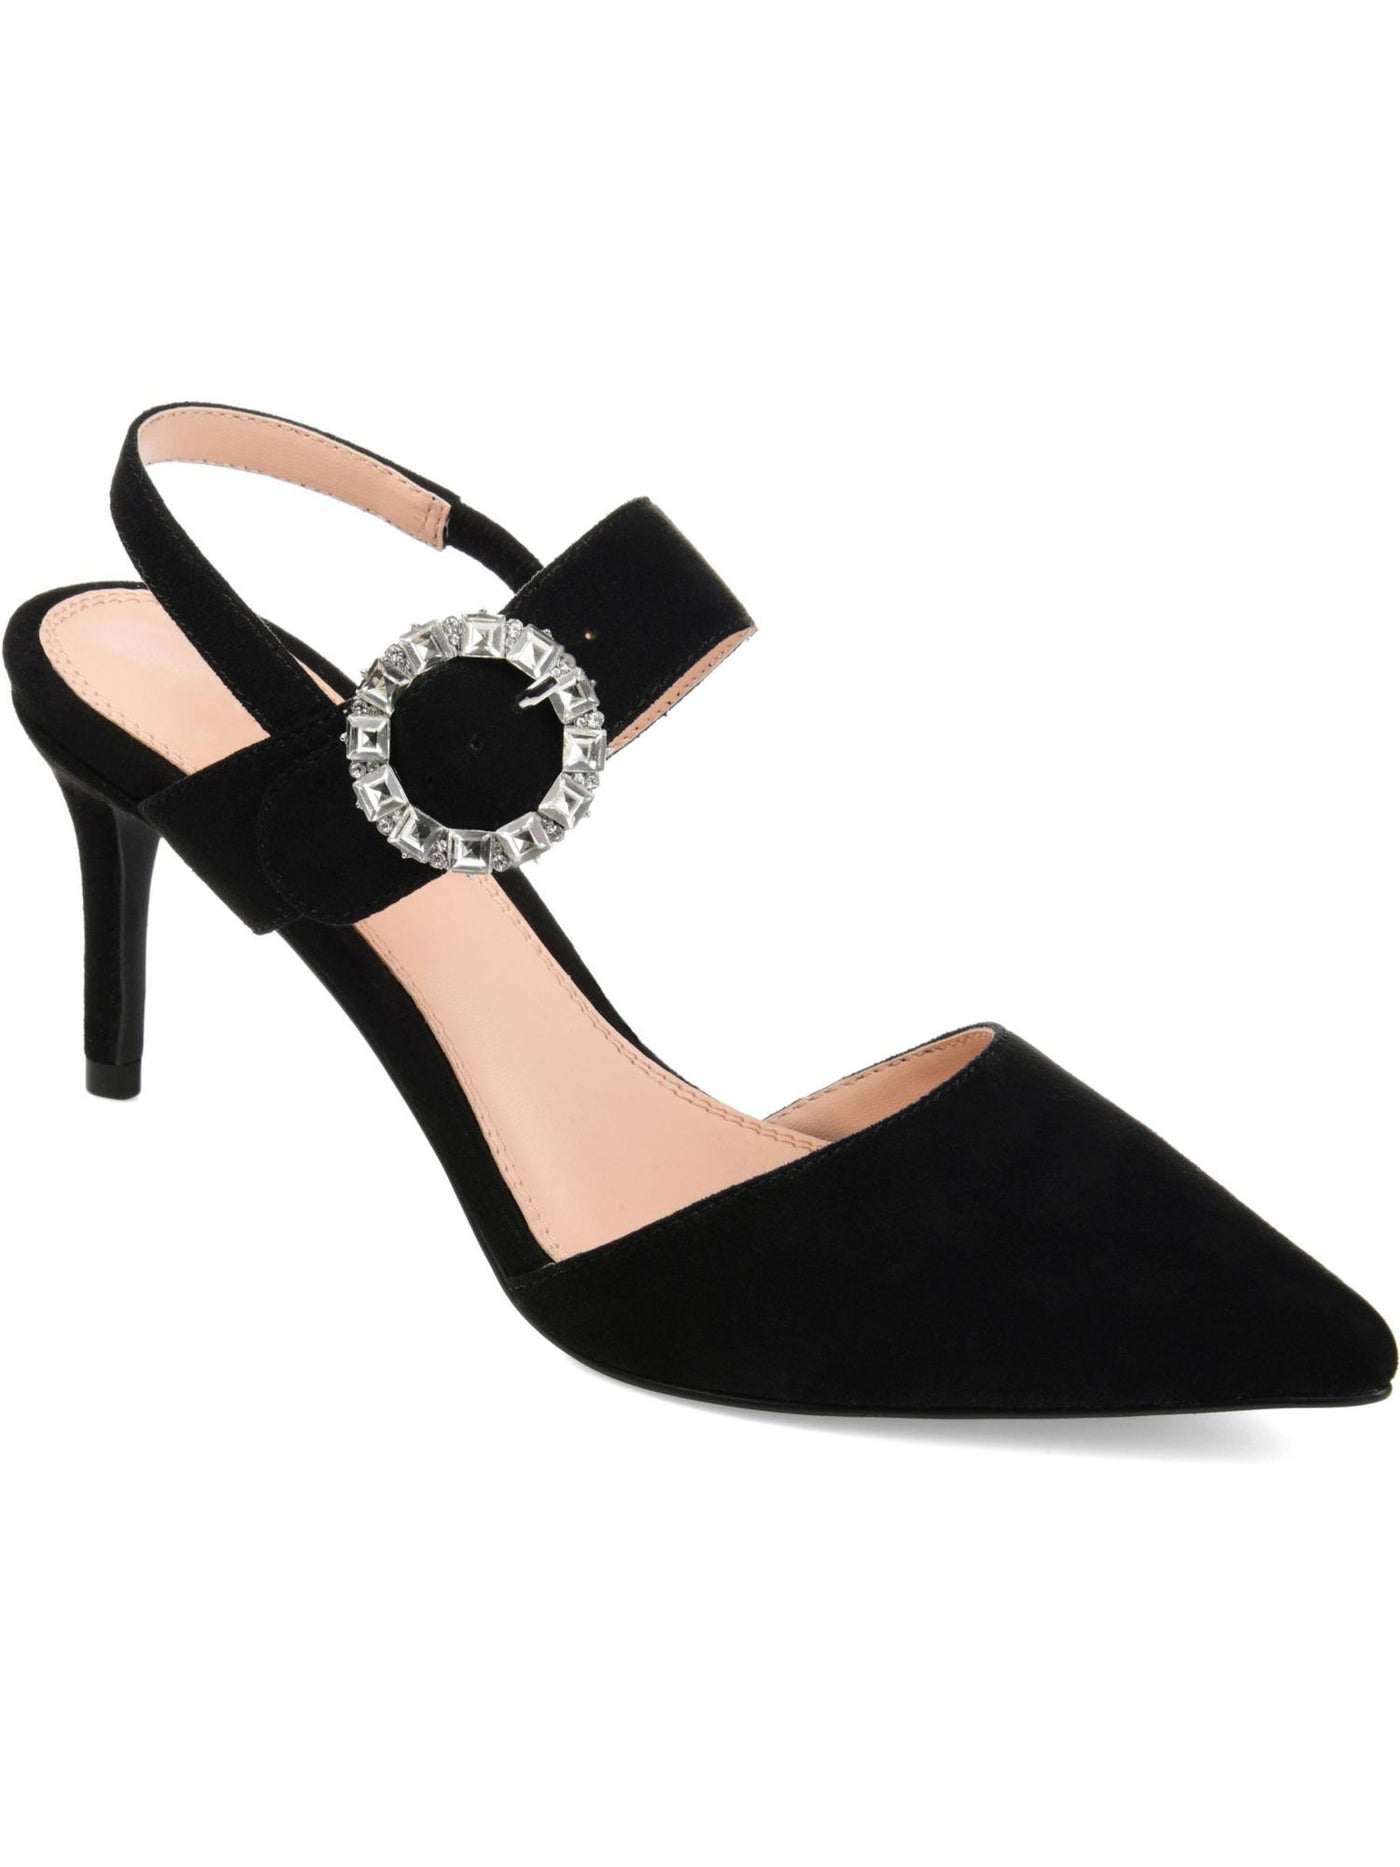 JOURNEE COLLECTION Womens Black Gem Accent Cushioned Cecelia Pointed Toe Stiletto Buckle Dress Pumps 7